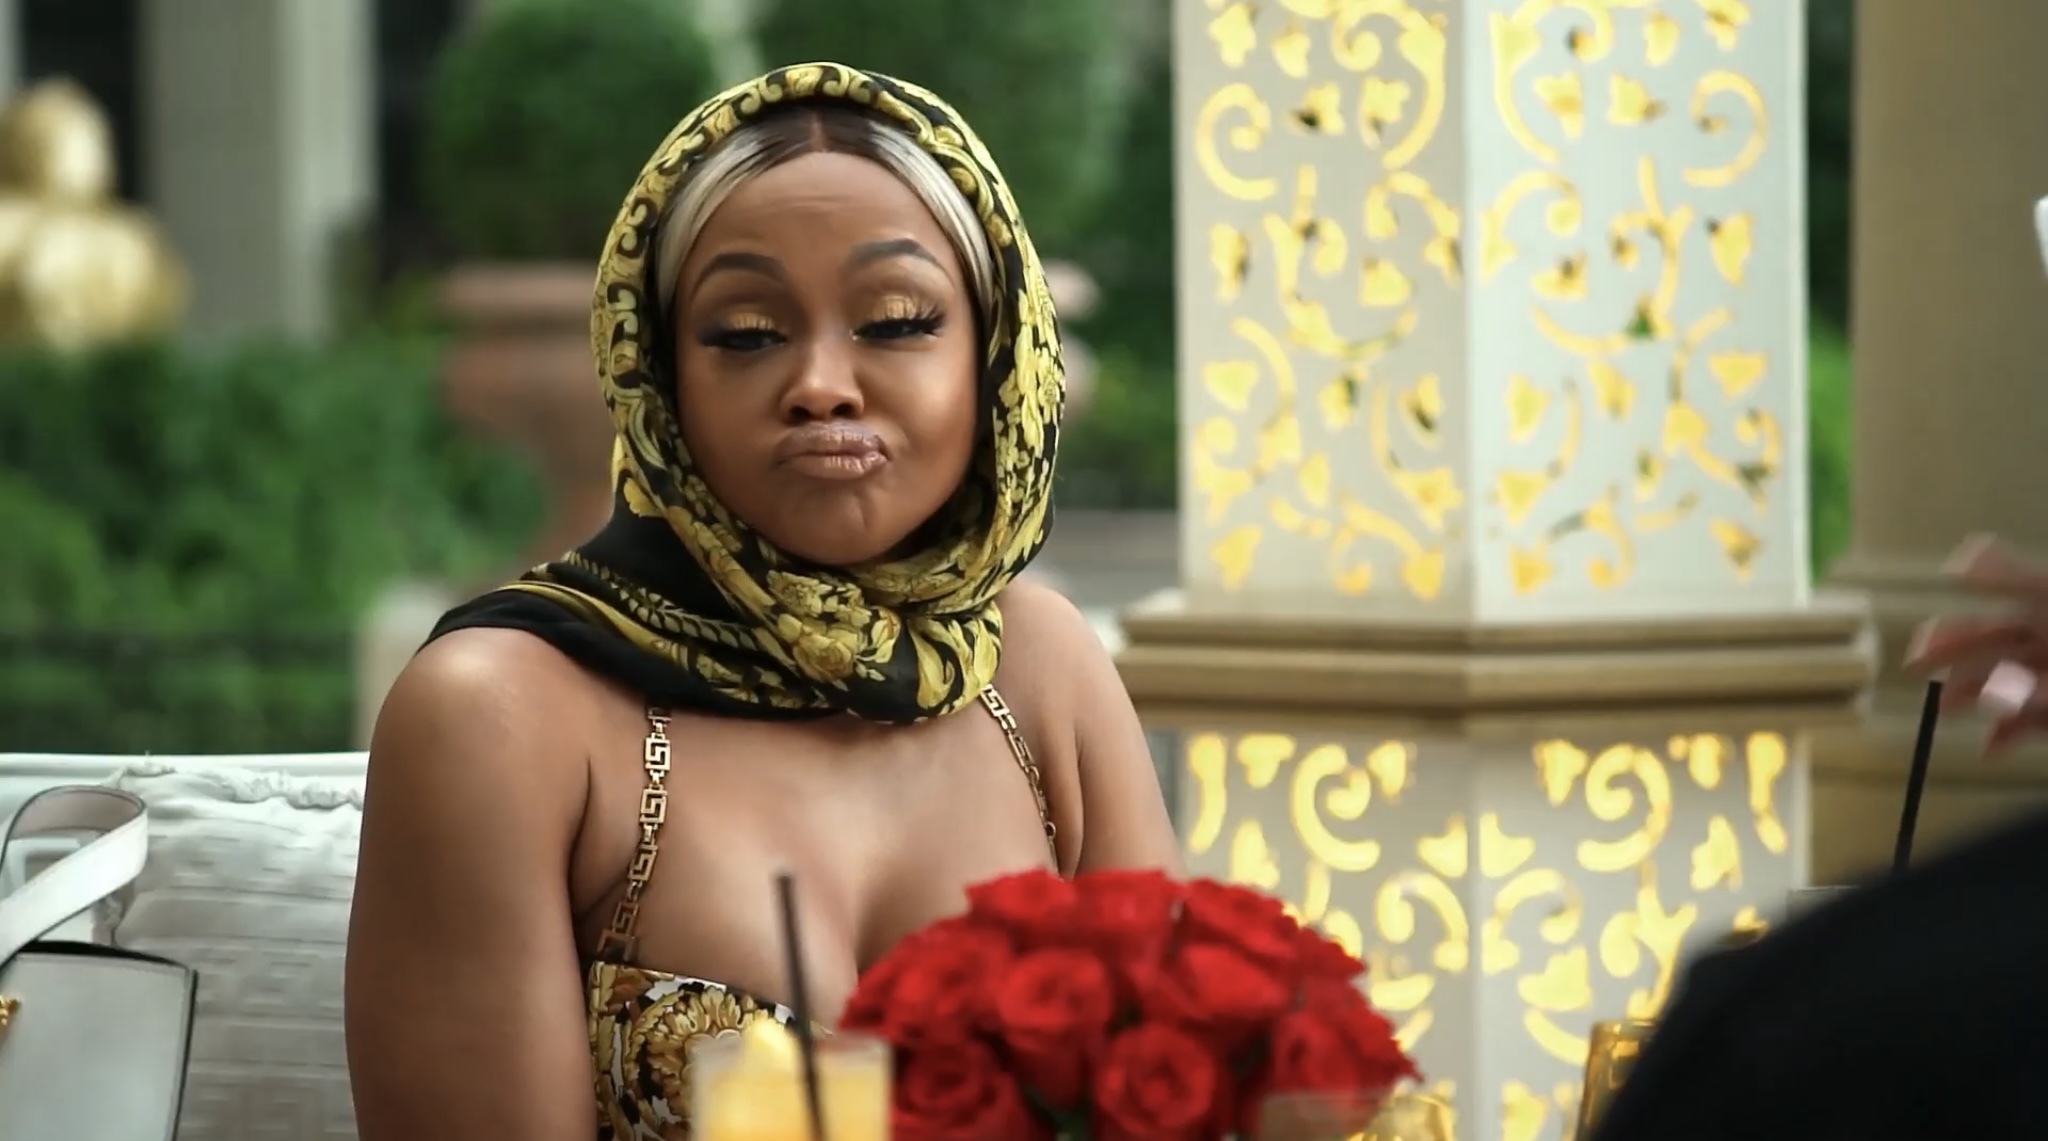 Ex RHOA Star Phaedra Parks Makes A Surprise Appearance On “The Real Housewives Of Dubai” [VIDEO]